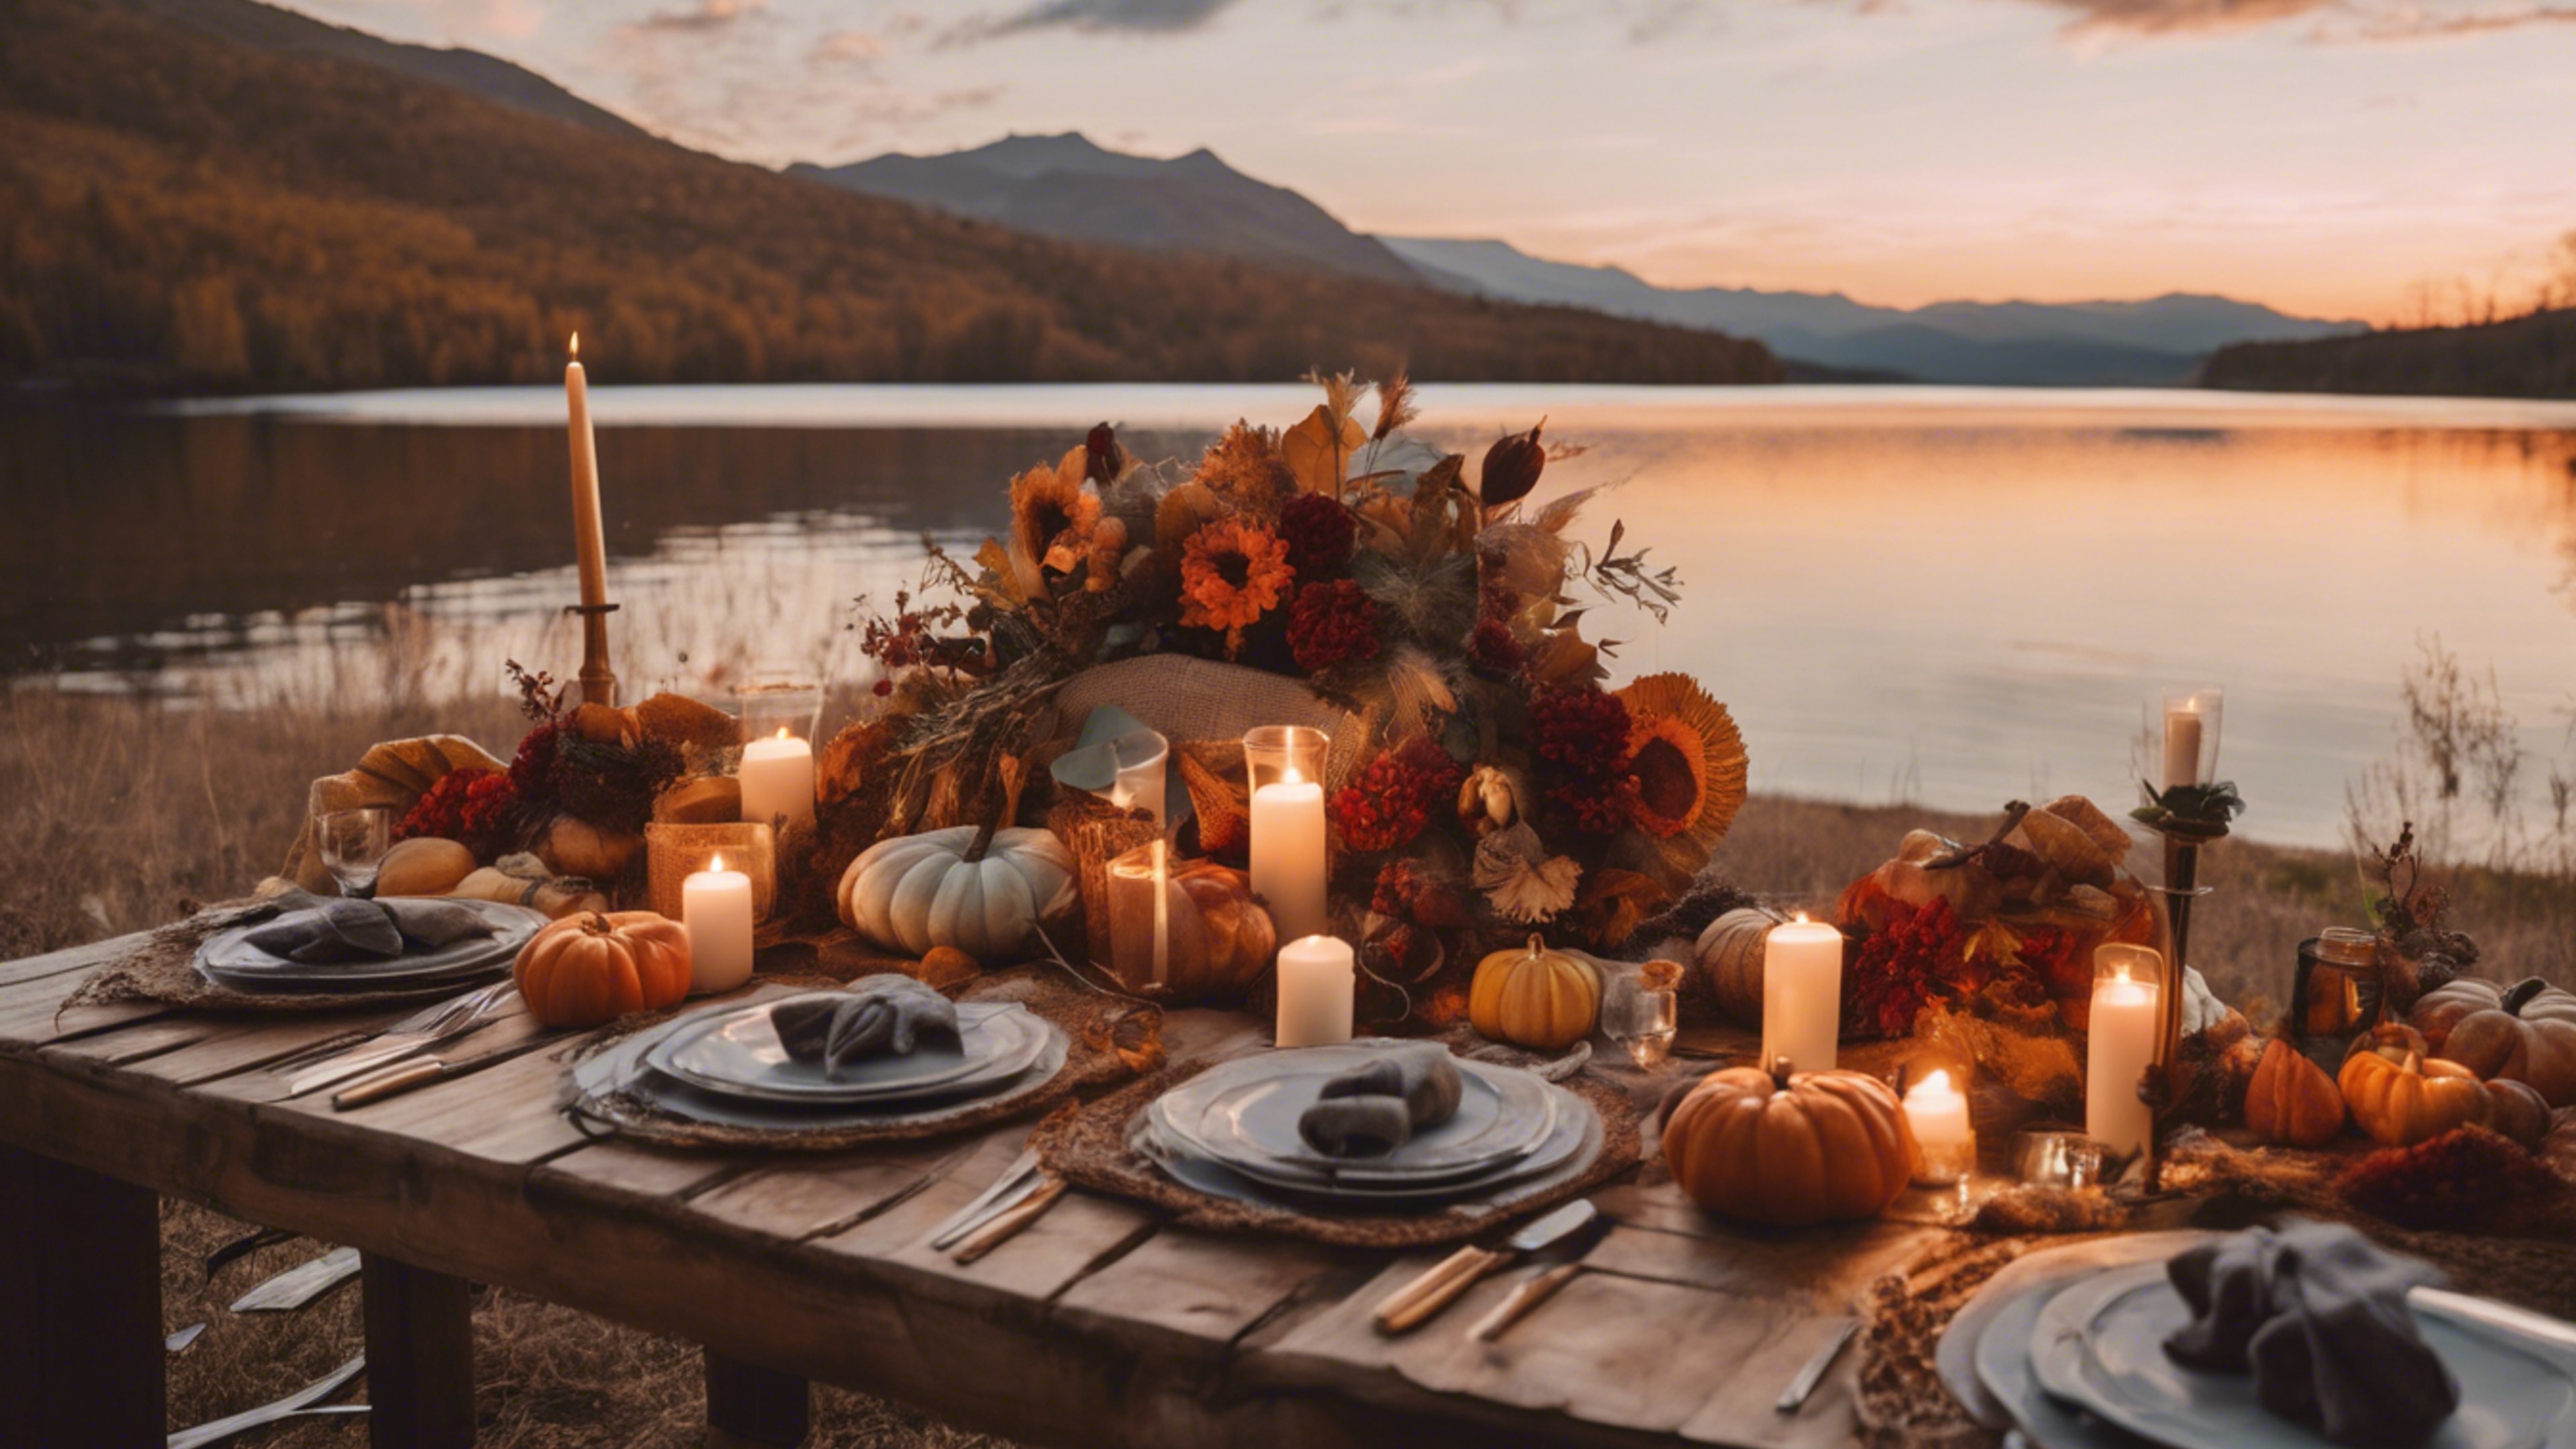 An outdoor Thanksgiving setup with boho decorations next to a breathtaking mountain lake during sunset. Тапет[488ff8a1b73146e3b682]